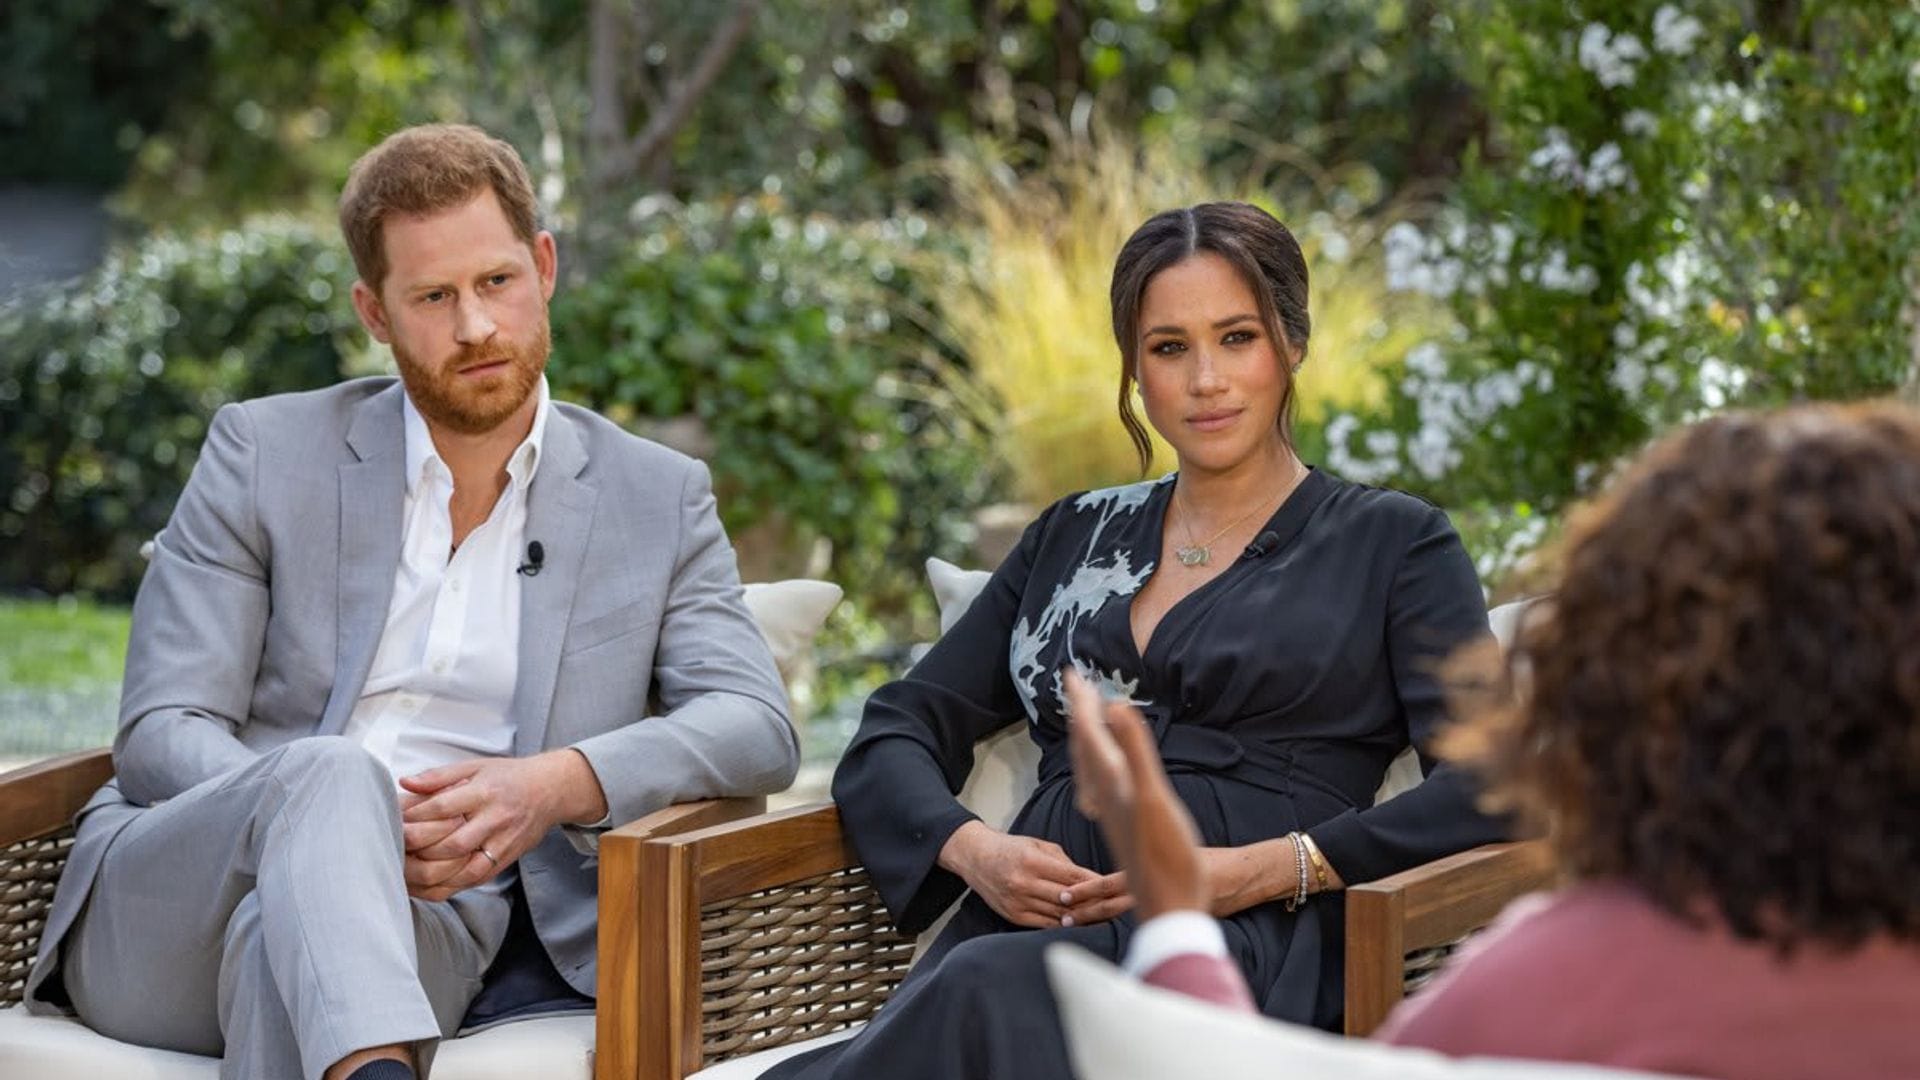 Oprah’s interview with Meghan Markle and Prince Harry scores Emmy nomination